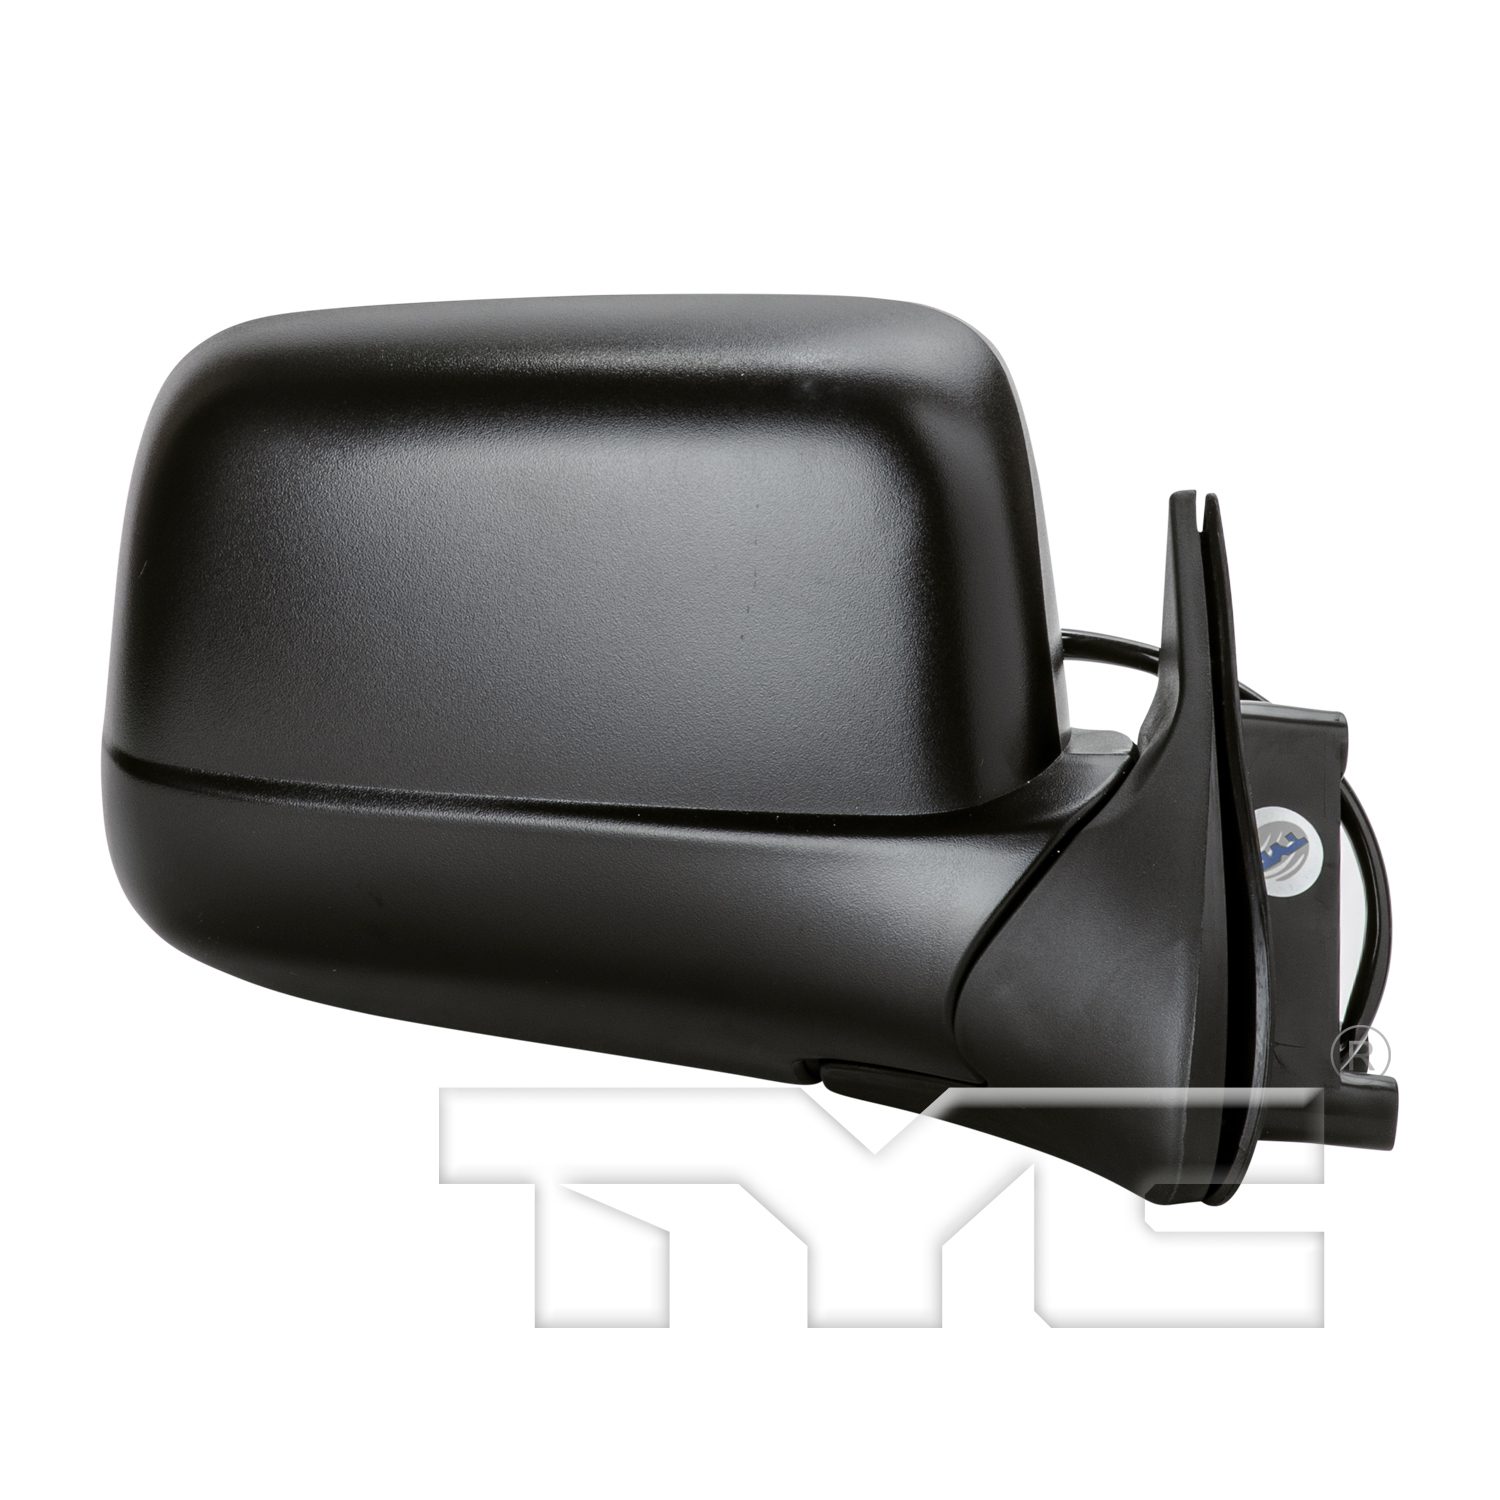 Aftermarket MIRRORS for NISSAN - FRONTIER, FRONTIER,01-04,RT Mirror outside rear view